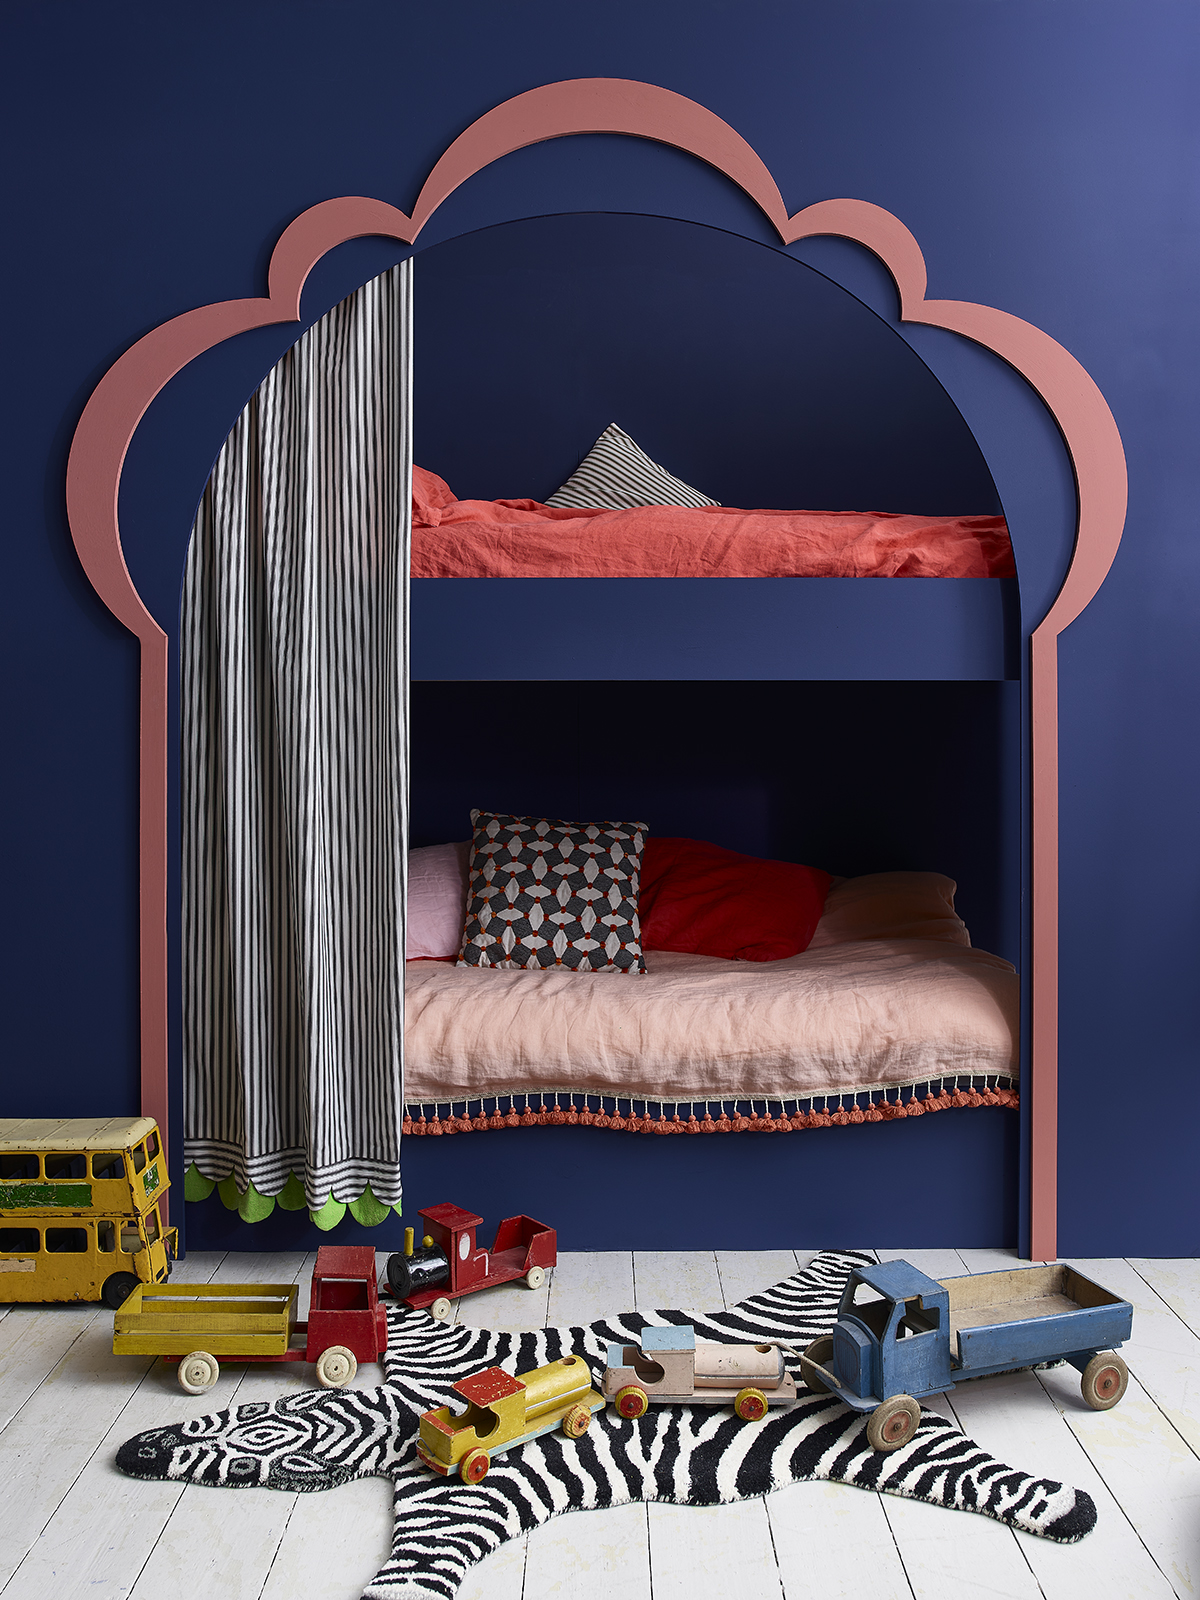 Children's bedroom bunk beds in Annie Sloan Napoleonic Blue Chalk Paint and Scandinavian Pink with Annie Sloan Linen Union curtains